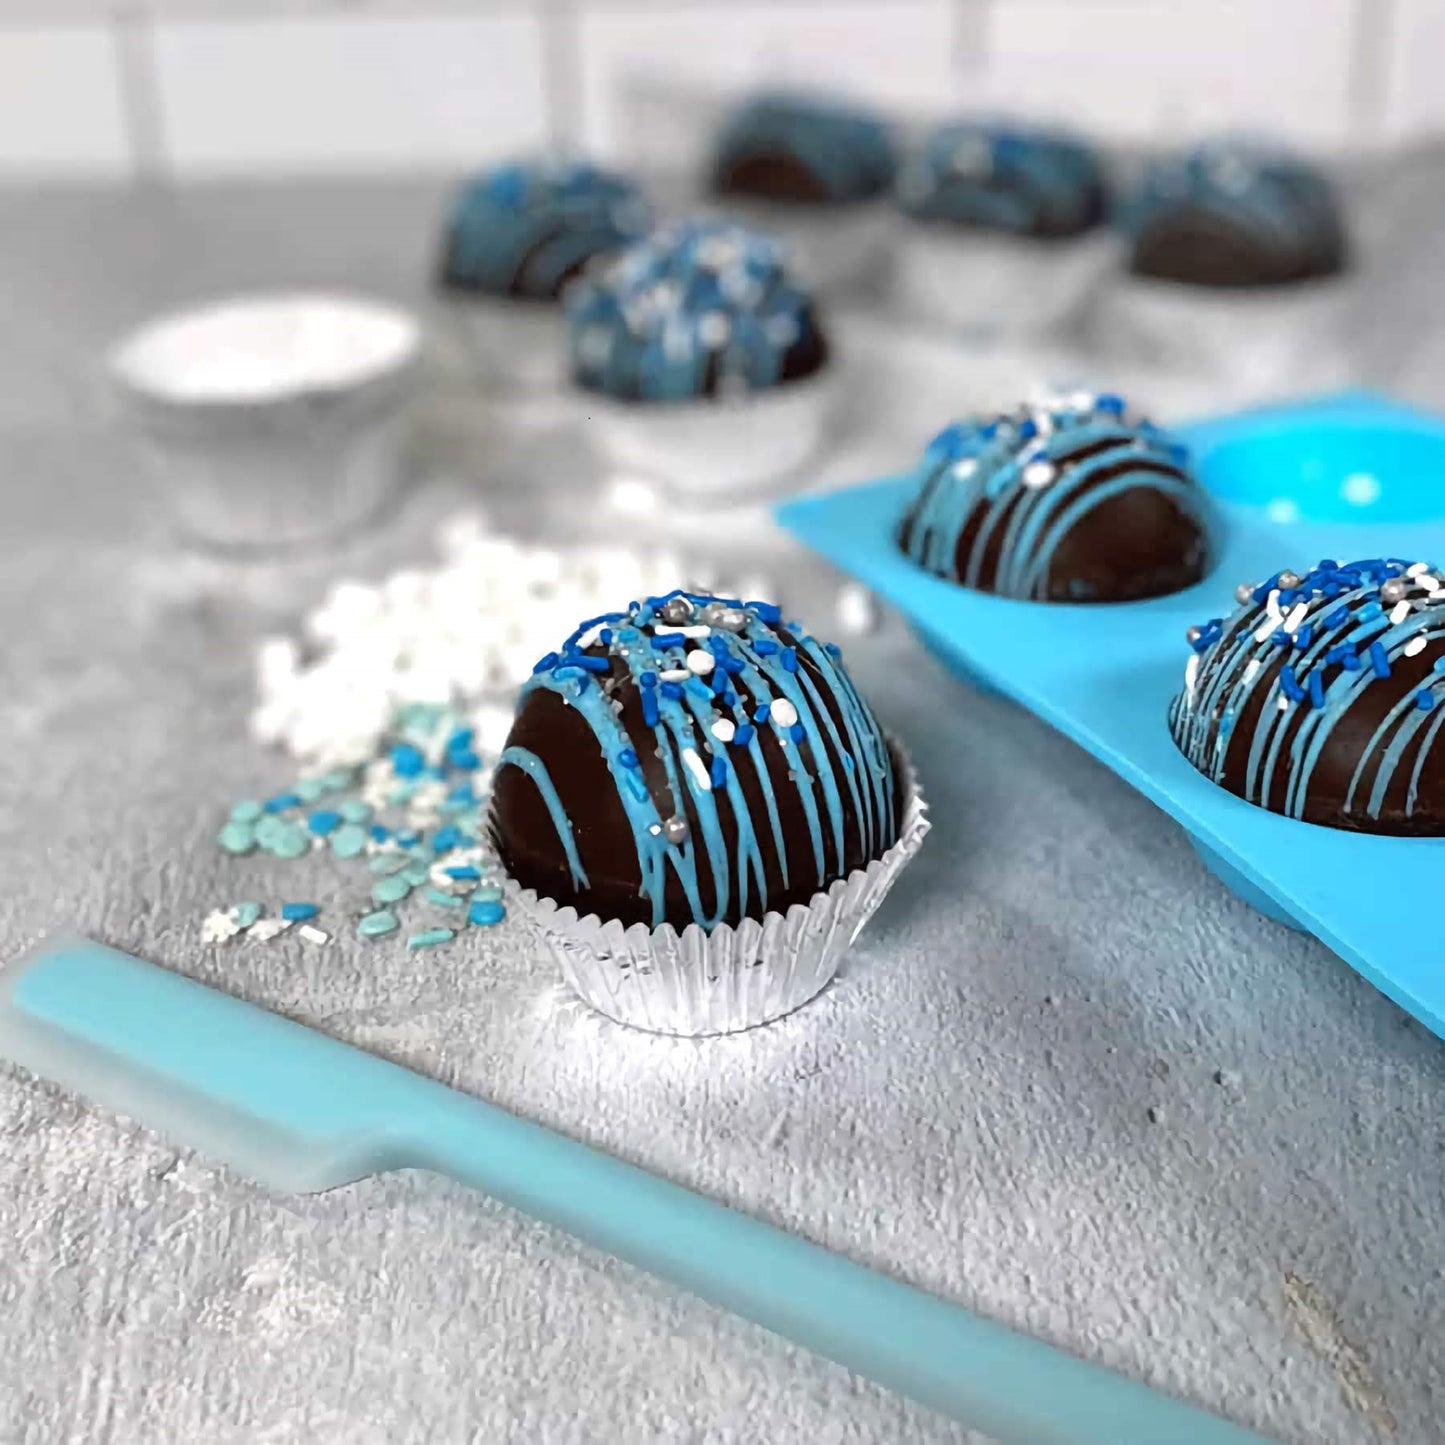 The image presents a culinary scene with completed hot chocolate bombs in the foreground, elegantly drizzled with blue icing and sprinkled with white and blue decorations. These spherical chocolate treats sit in paper cups and are staged on a light-colored countertop. In the background, a light blue silicone mold, the kind used to create these chocolate spheres, can be seen with additional unfinished chocolate bombs in its cavities.